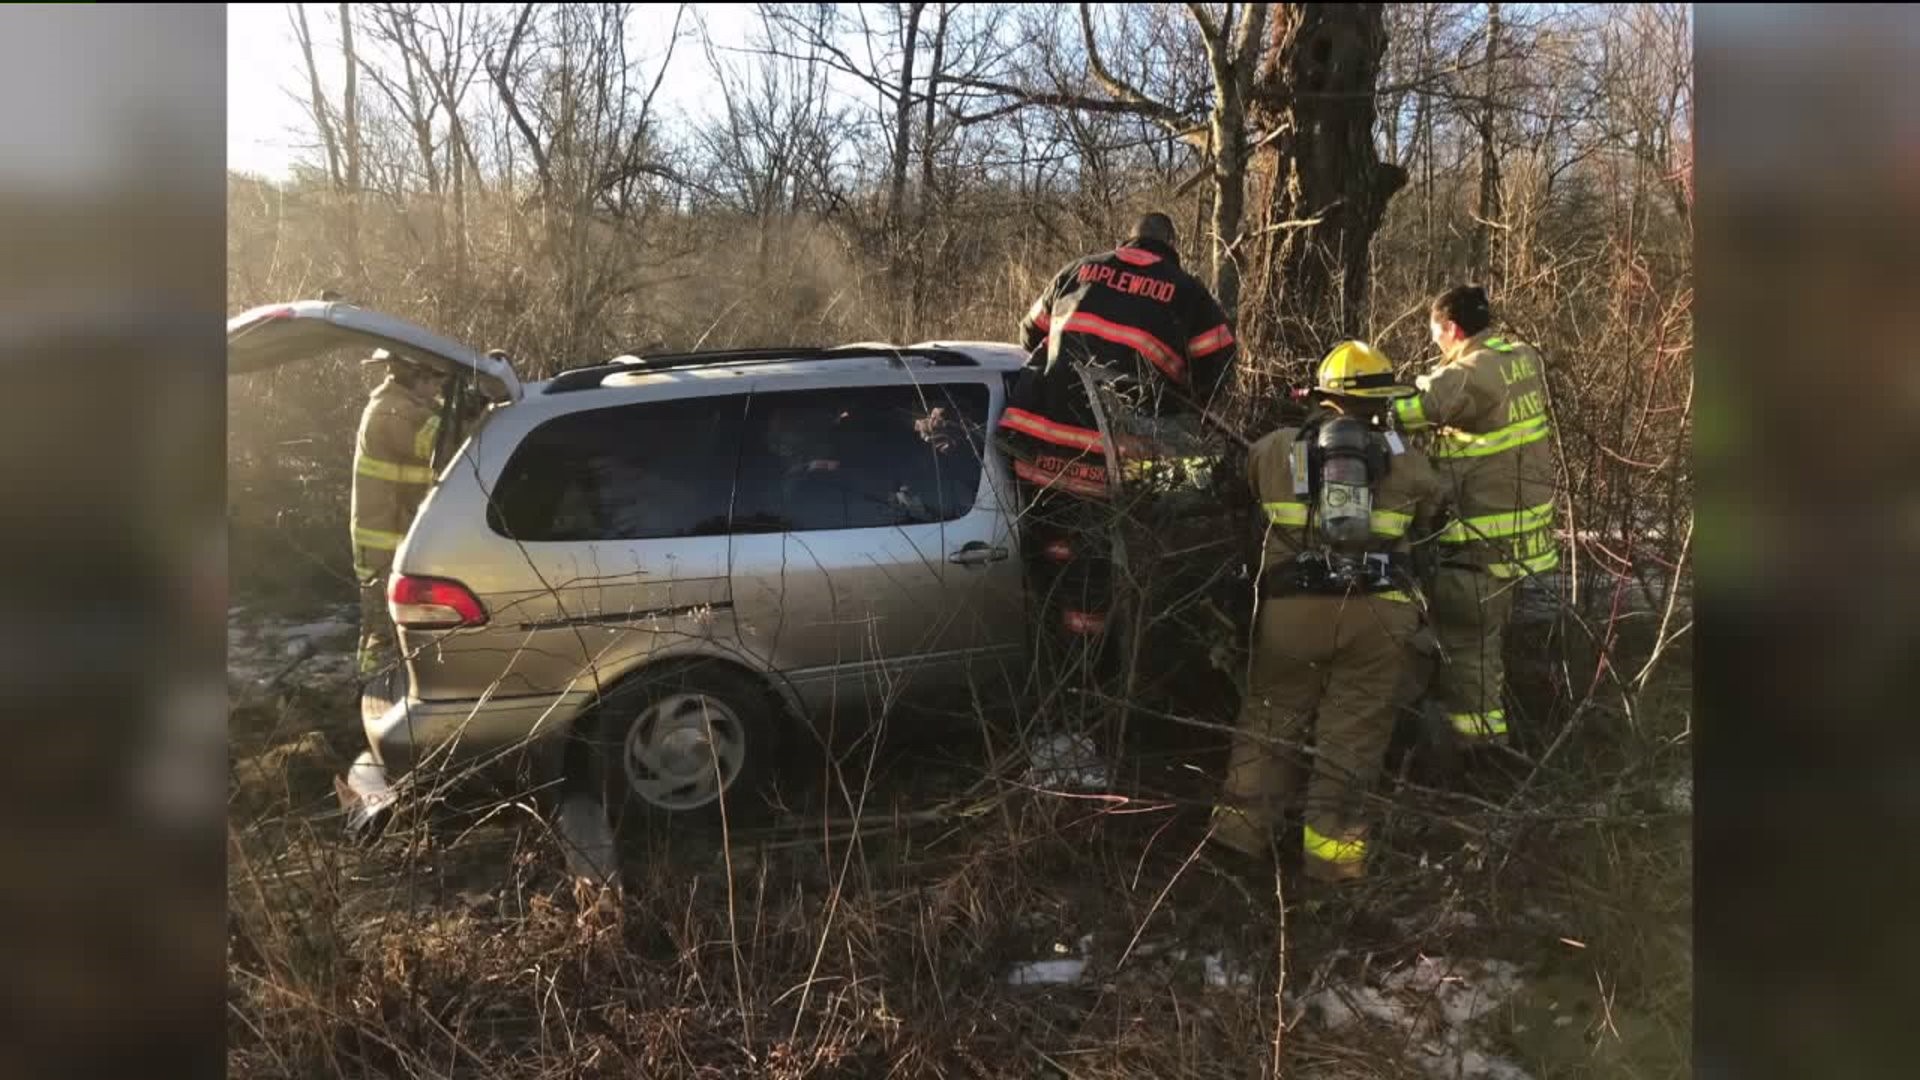 Driver Flown to Hospital After Crash in Wayne County